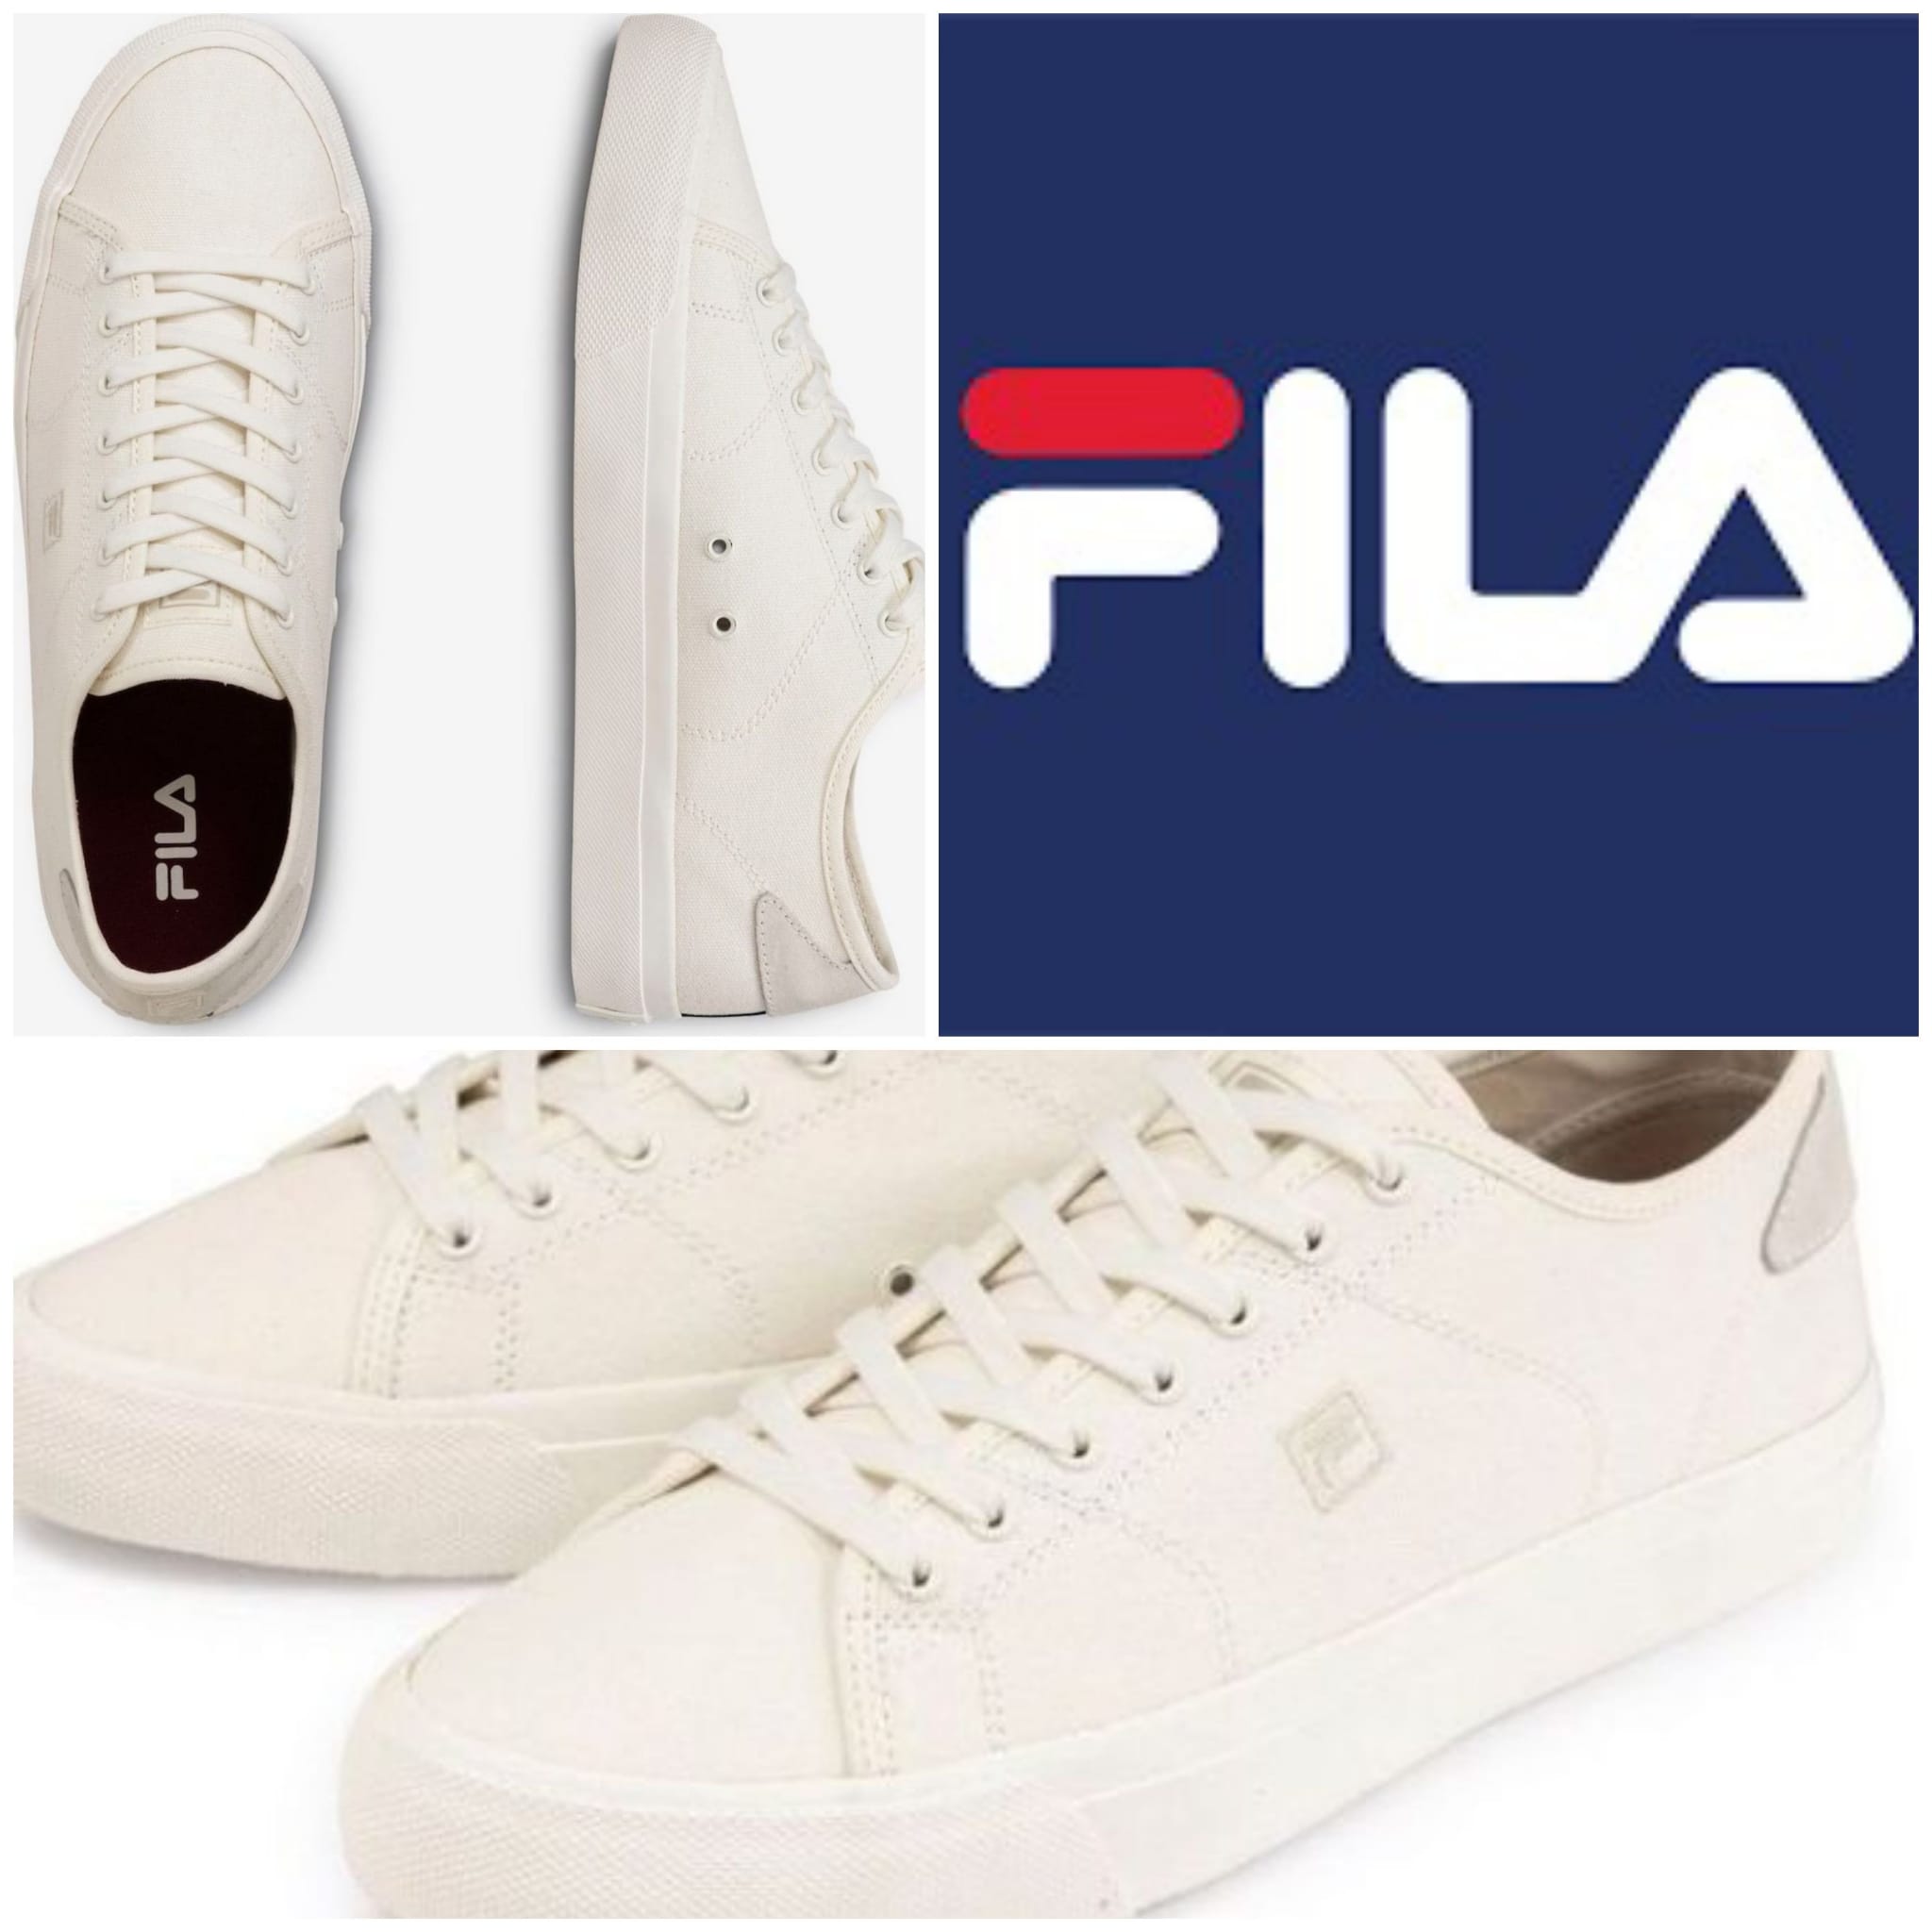 Men's trainers from Fila